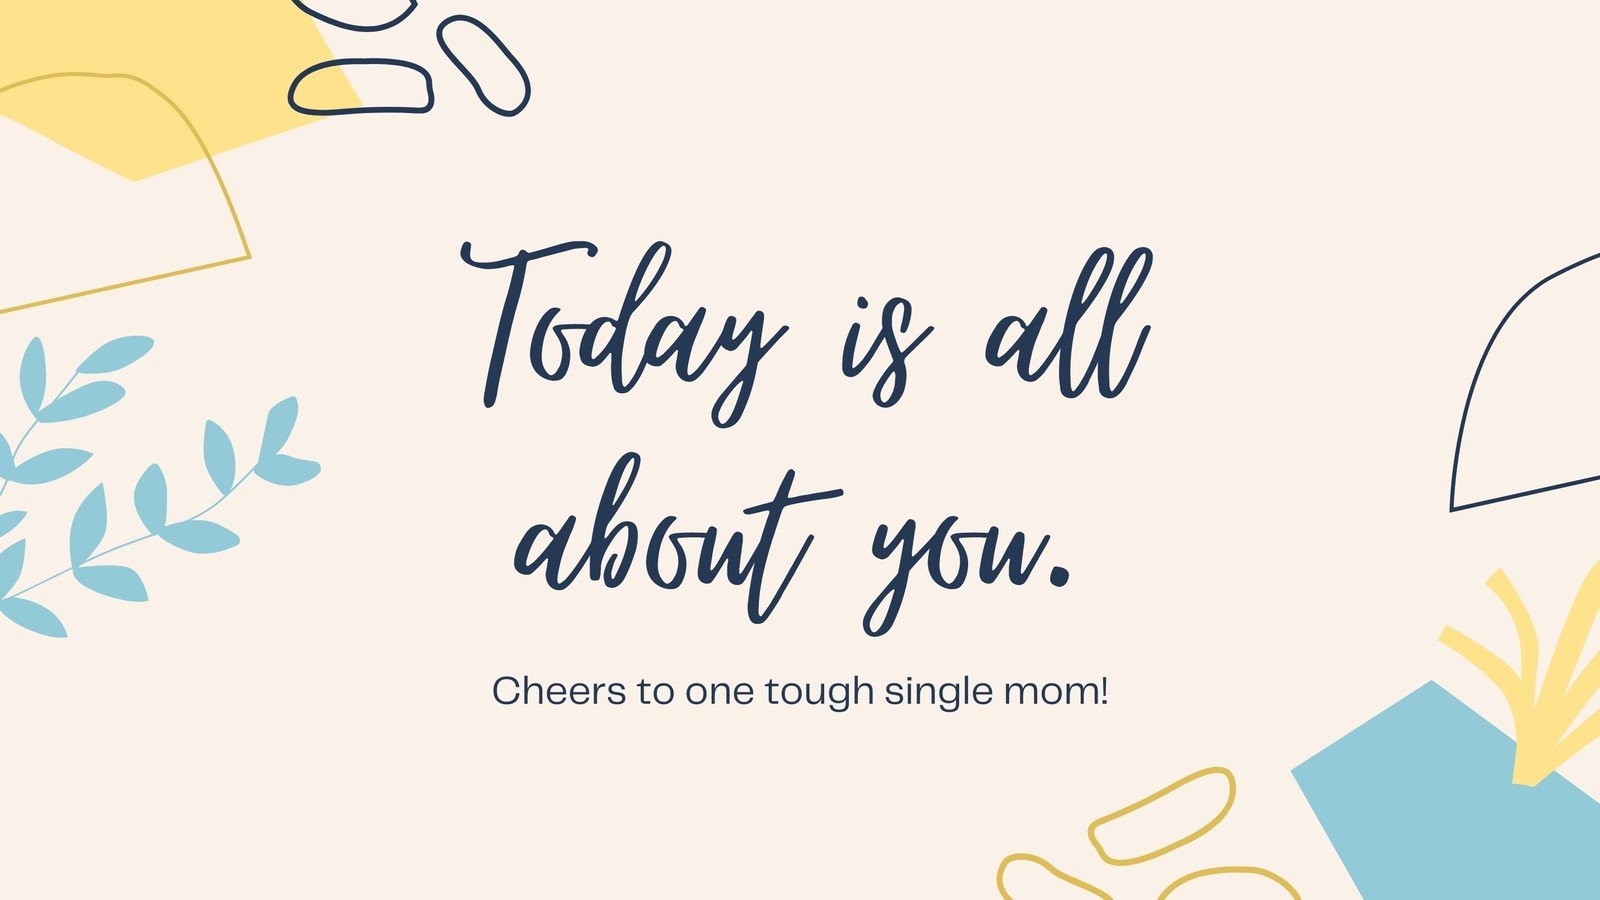 All Mother's Day - A meme, letter and video to get people thinking